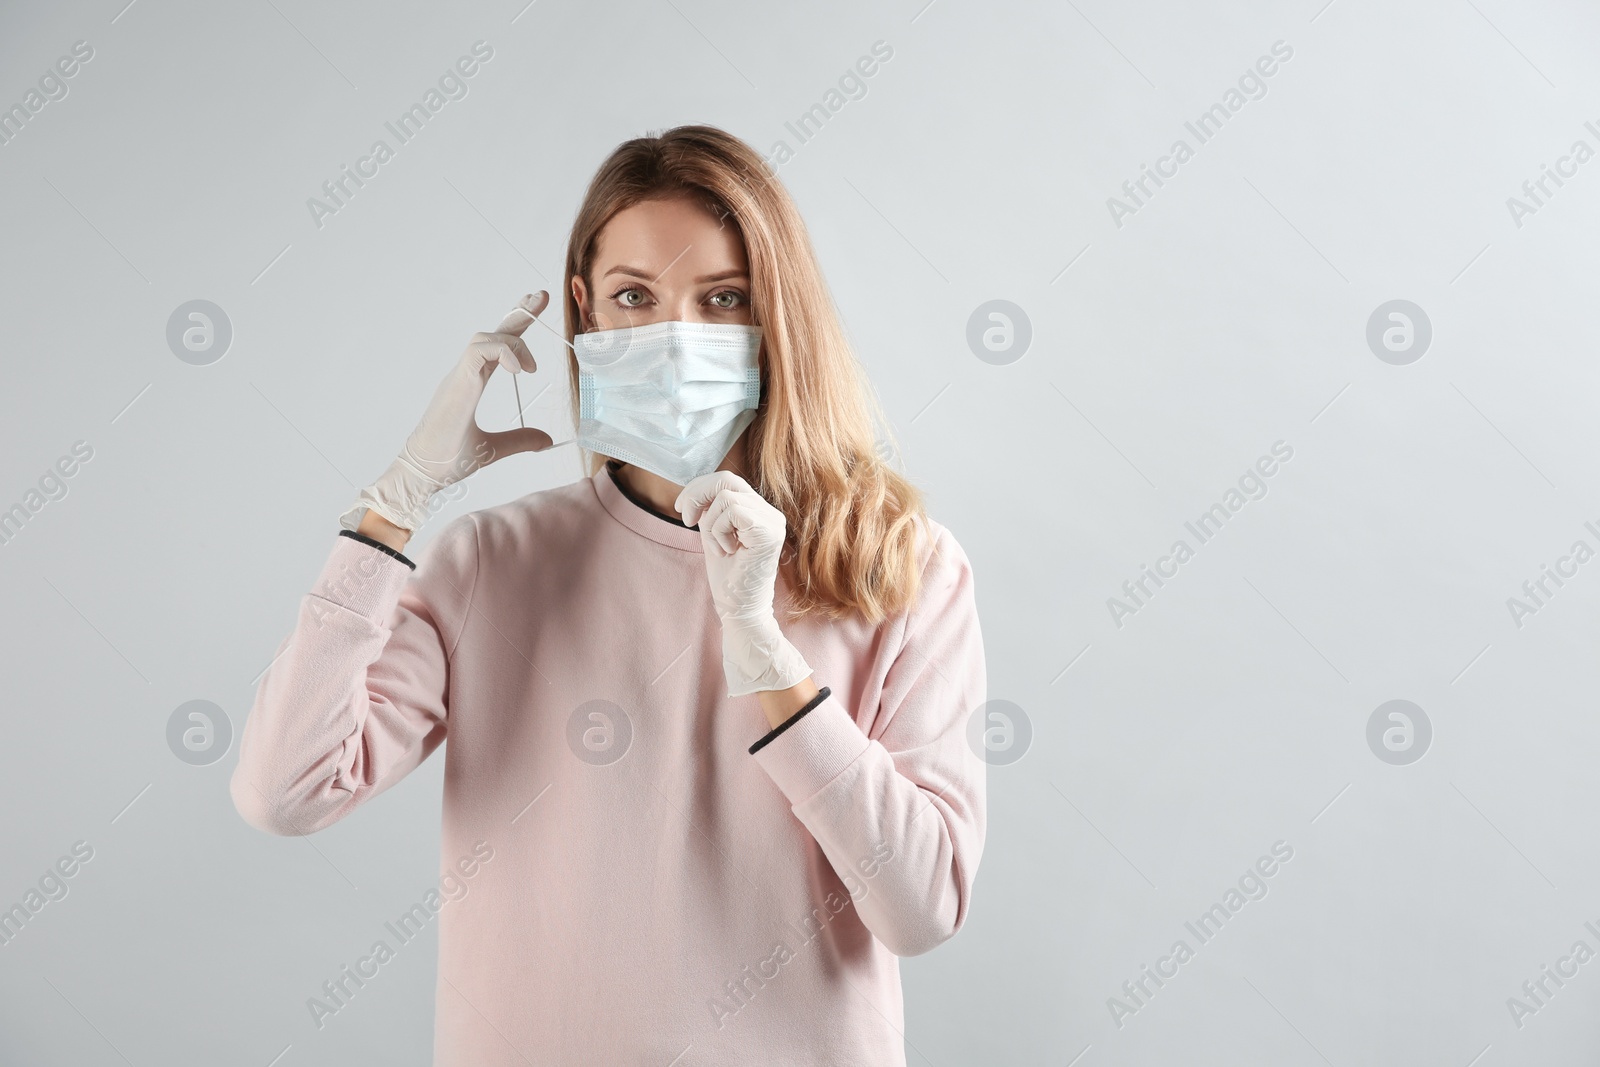 Photo of Young woman in medical gloves putting on protective mask against grey background. Space for text